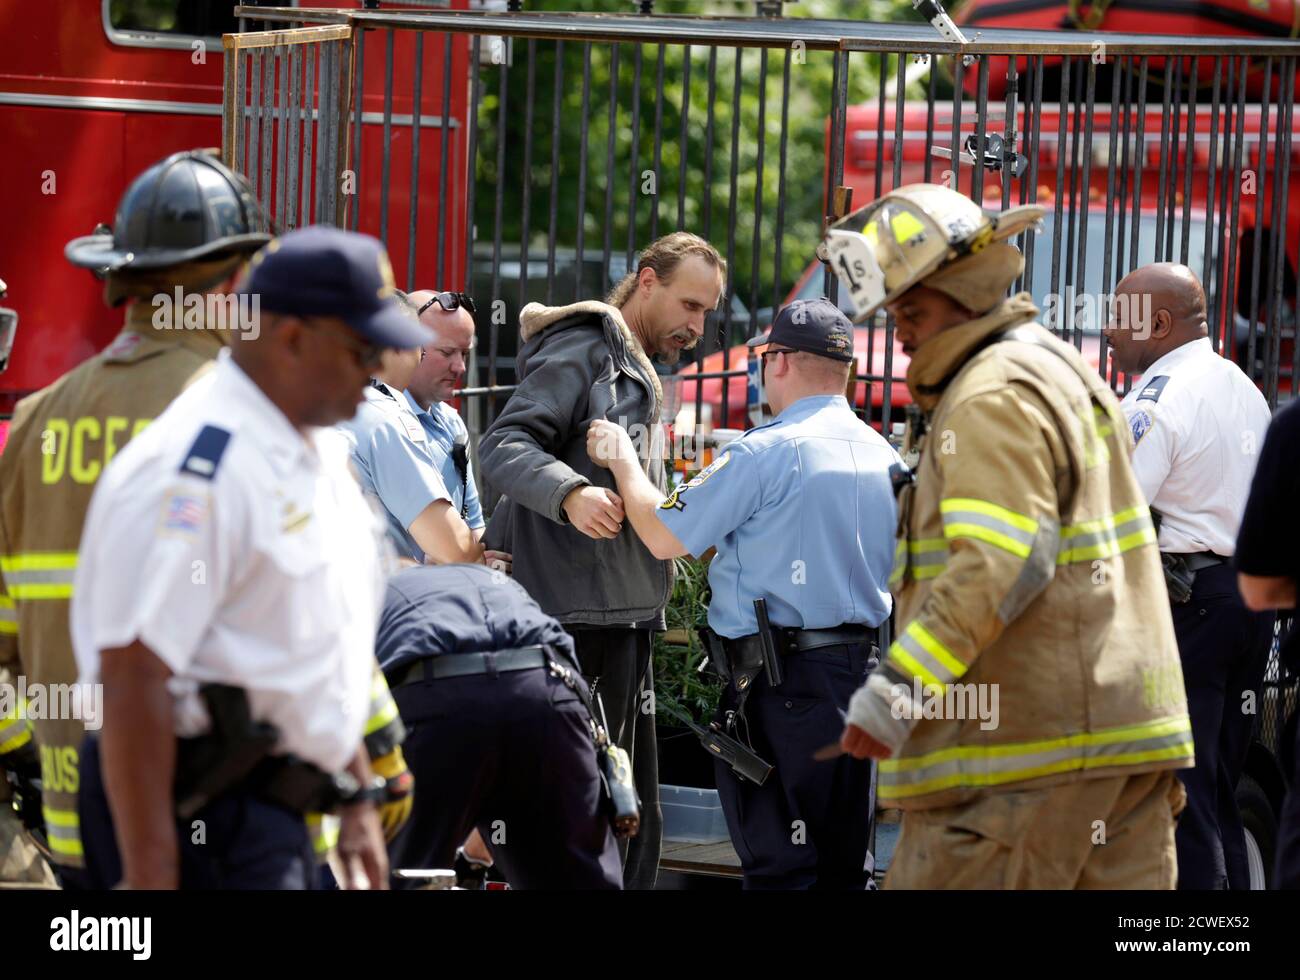 Police arrest David Bronner (C) after firefighters had to cut him out of a steel cage from which he staged a protest in front of the White House in Washington June 11, 2012. Bronner was protesting federal policy that prevents U.S. farmers from growing industrial hemp. REUTERS/Kevin Lamarque  (UNITED STATES - Tags: CRIME LAW CIVIL UNREST) Stock Photo